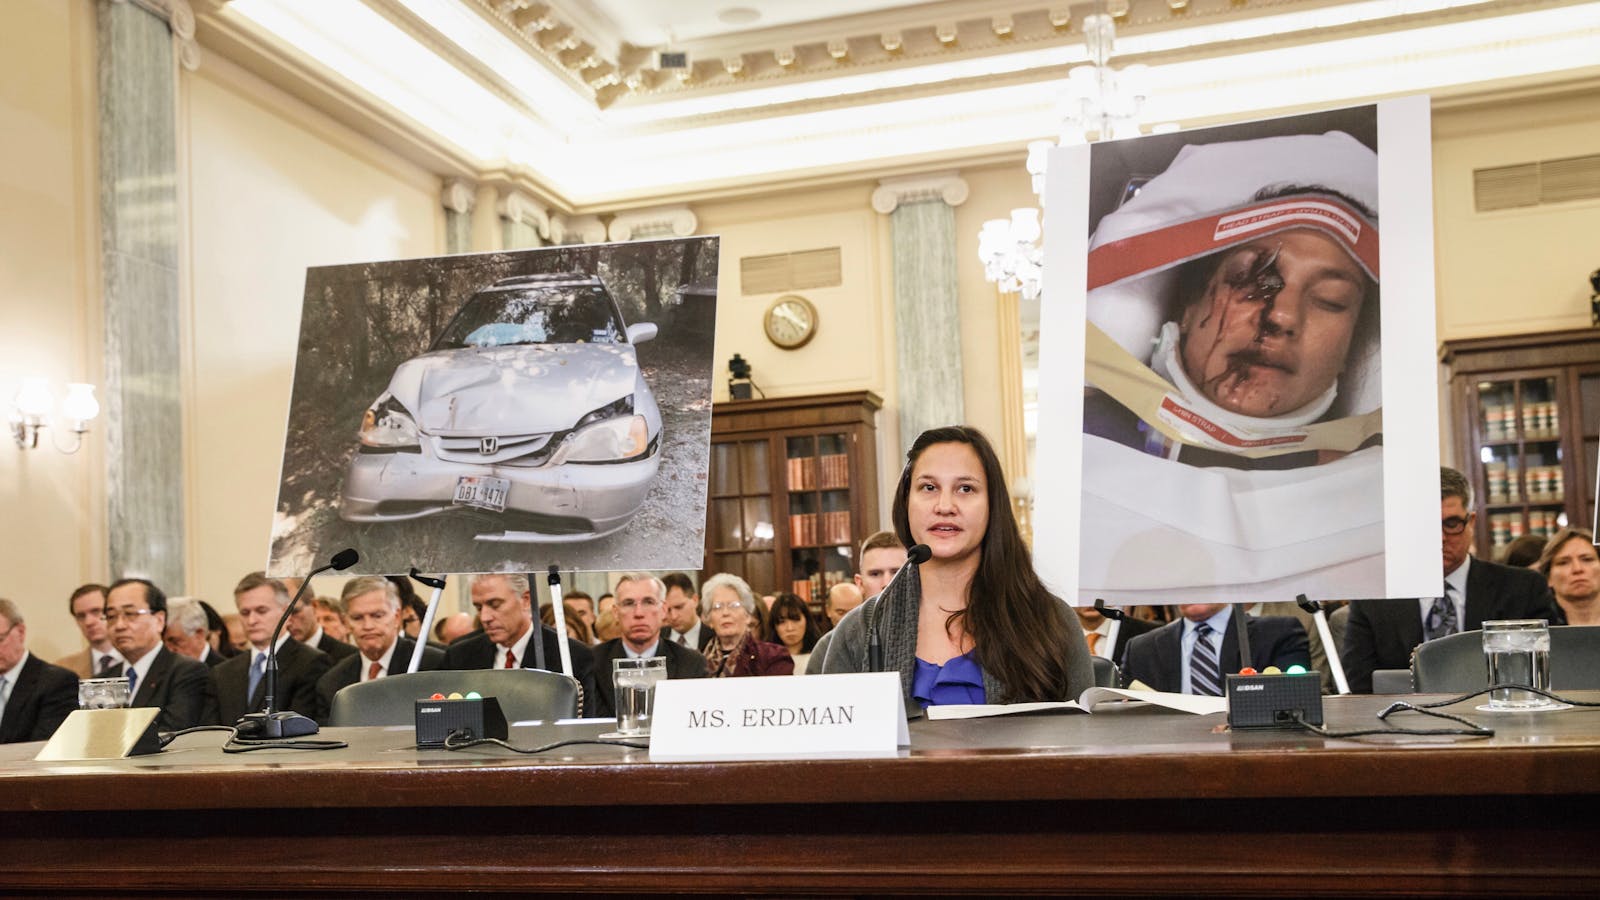 Stephanie Erdman, who was injured when a Takata airbag blew up, testifies before Congress in 2014. Photo by the AP.